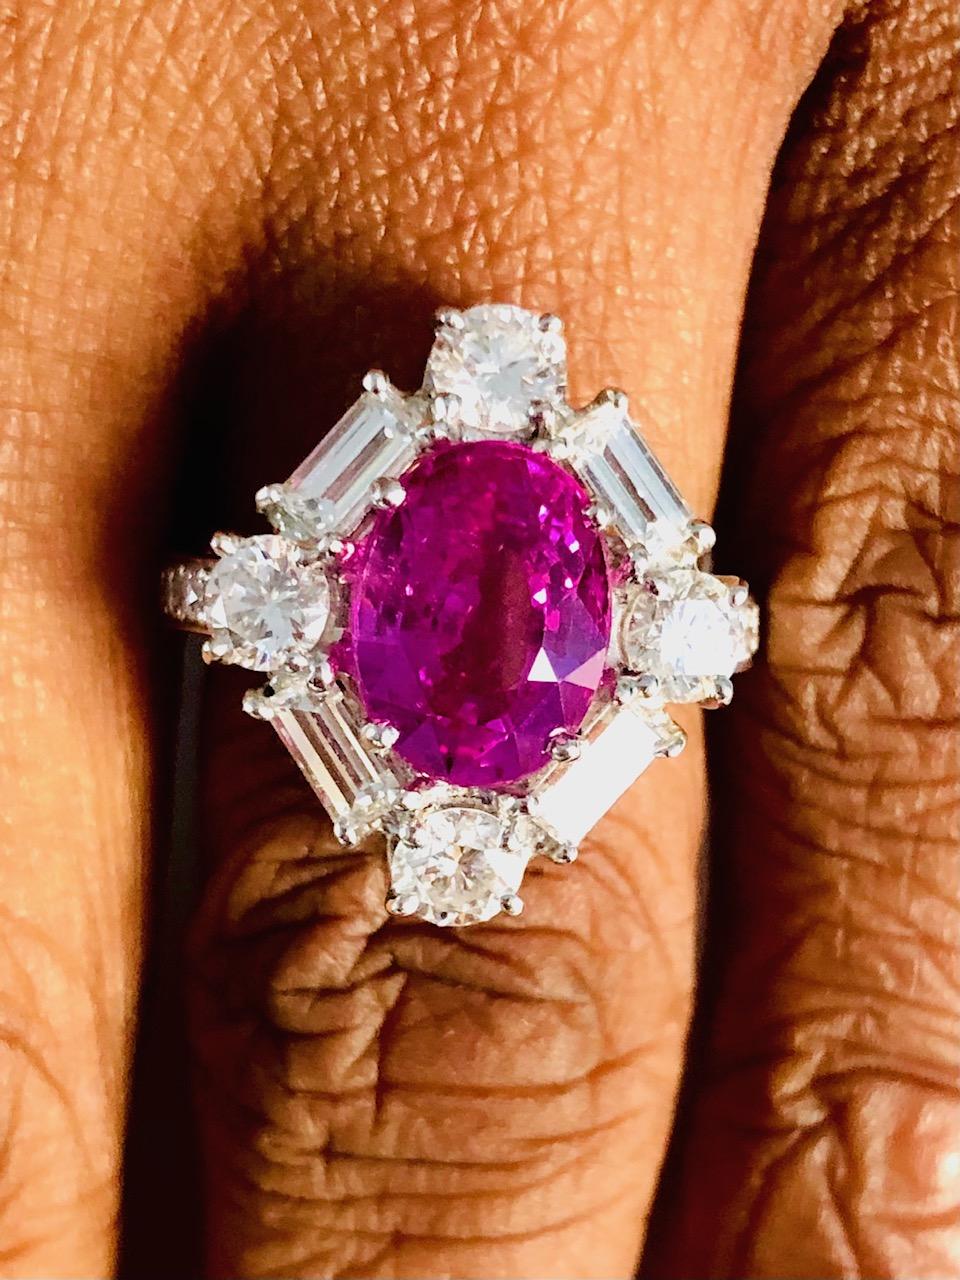 Platinum Fashionable Ring, set with a gorgeous color Pink Sapphire 4.08 carats surrounded by 16 Diamonds 2.27 carats.
The color of this clean Pink Sapphires is the most sweet and desirable.

We design and manufacture our jewelry in our workshop,